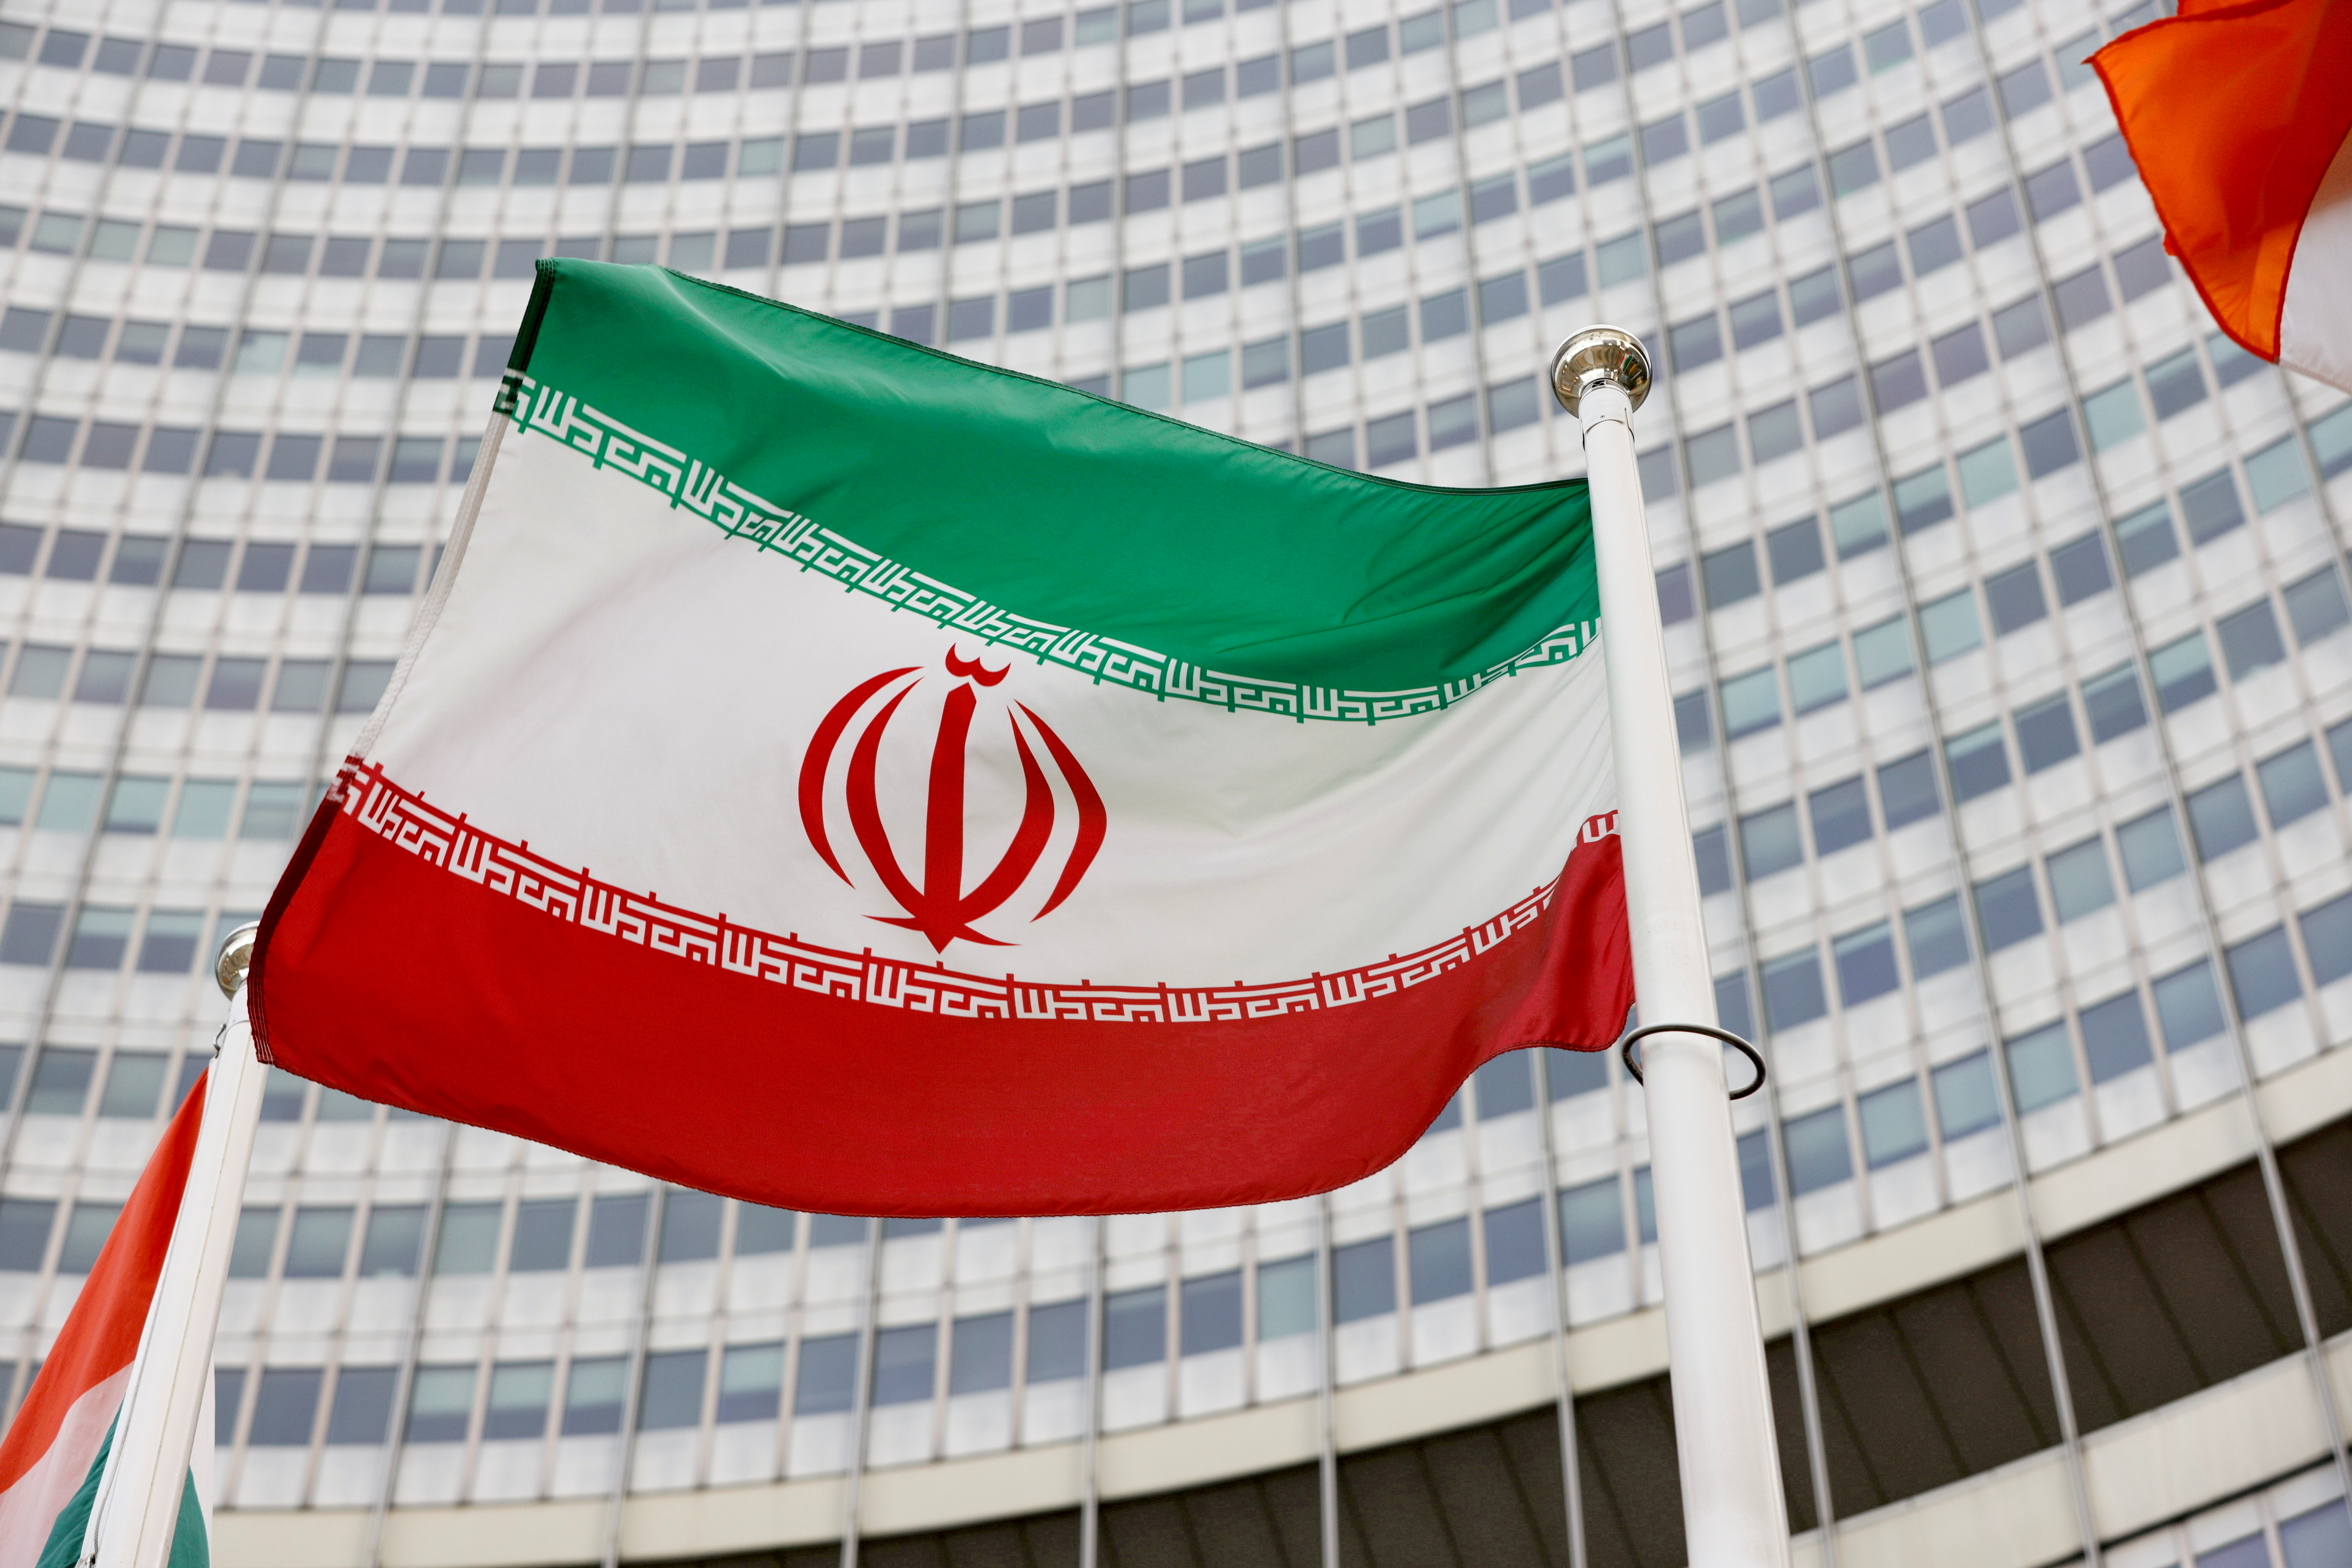 The Iranian flag flies in front of the International Atomic Energy Agency (IAEA) headquarters in Vienna, Austria May 23, 2021. REUTERS/Leonhard Foeger/File Photo